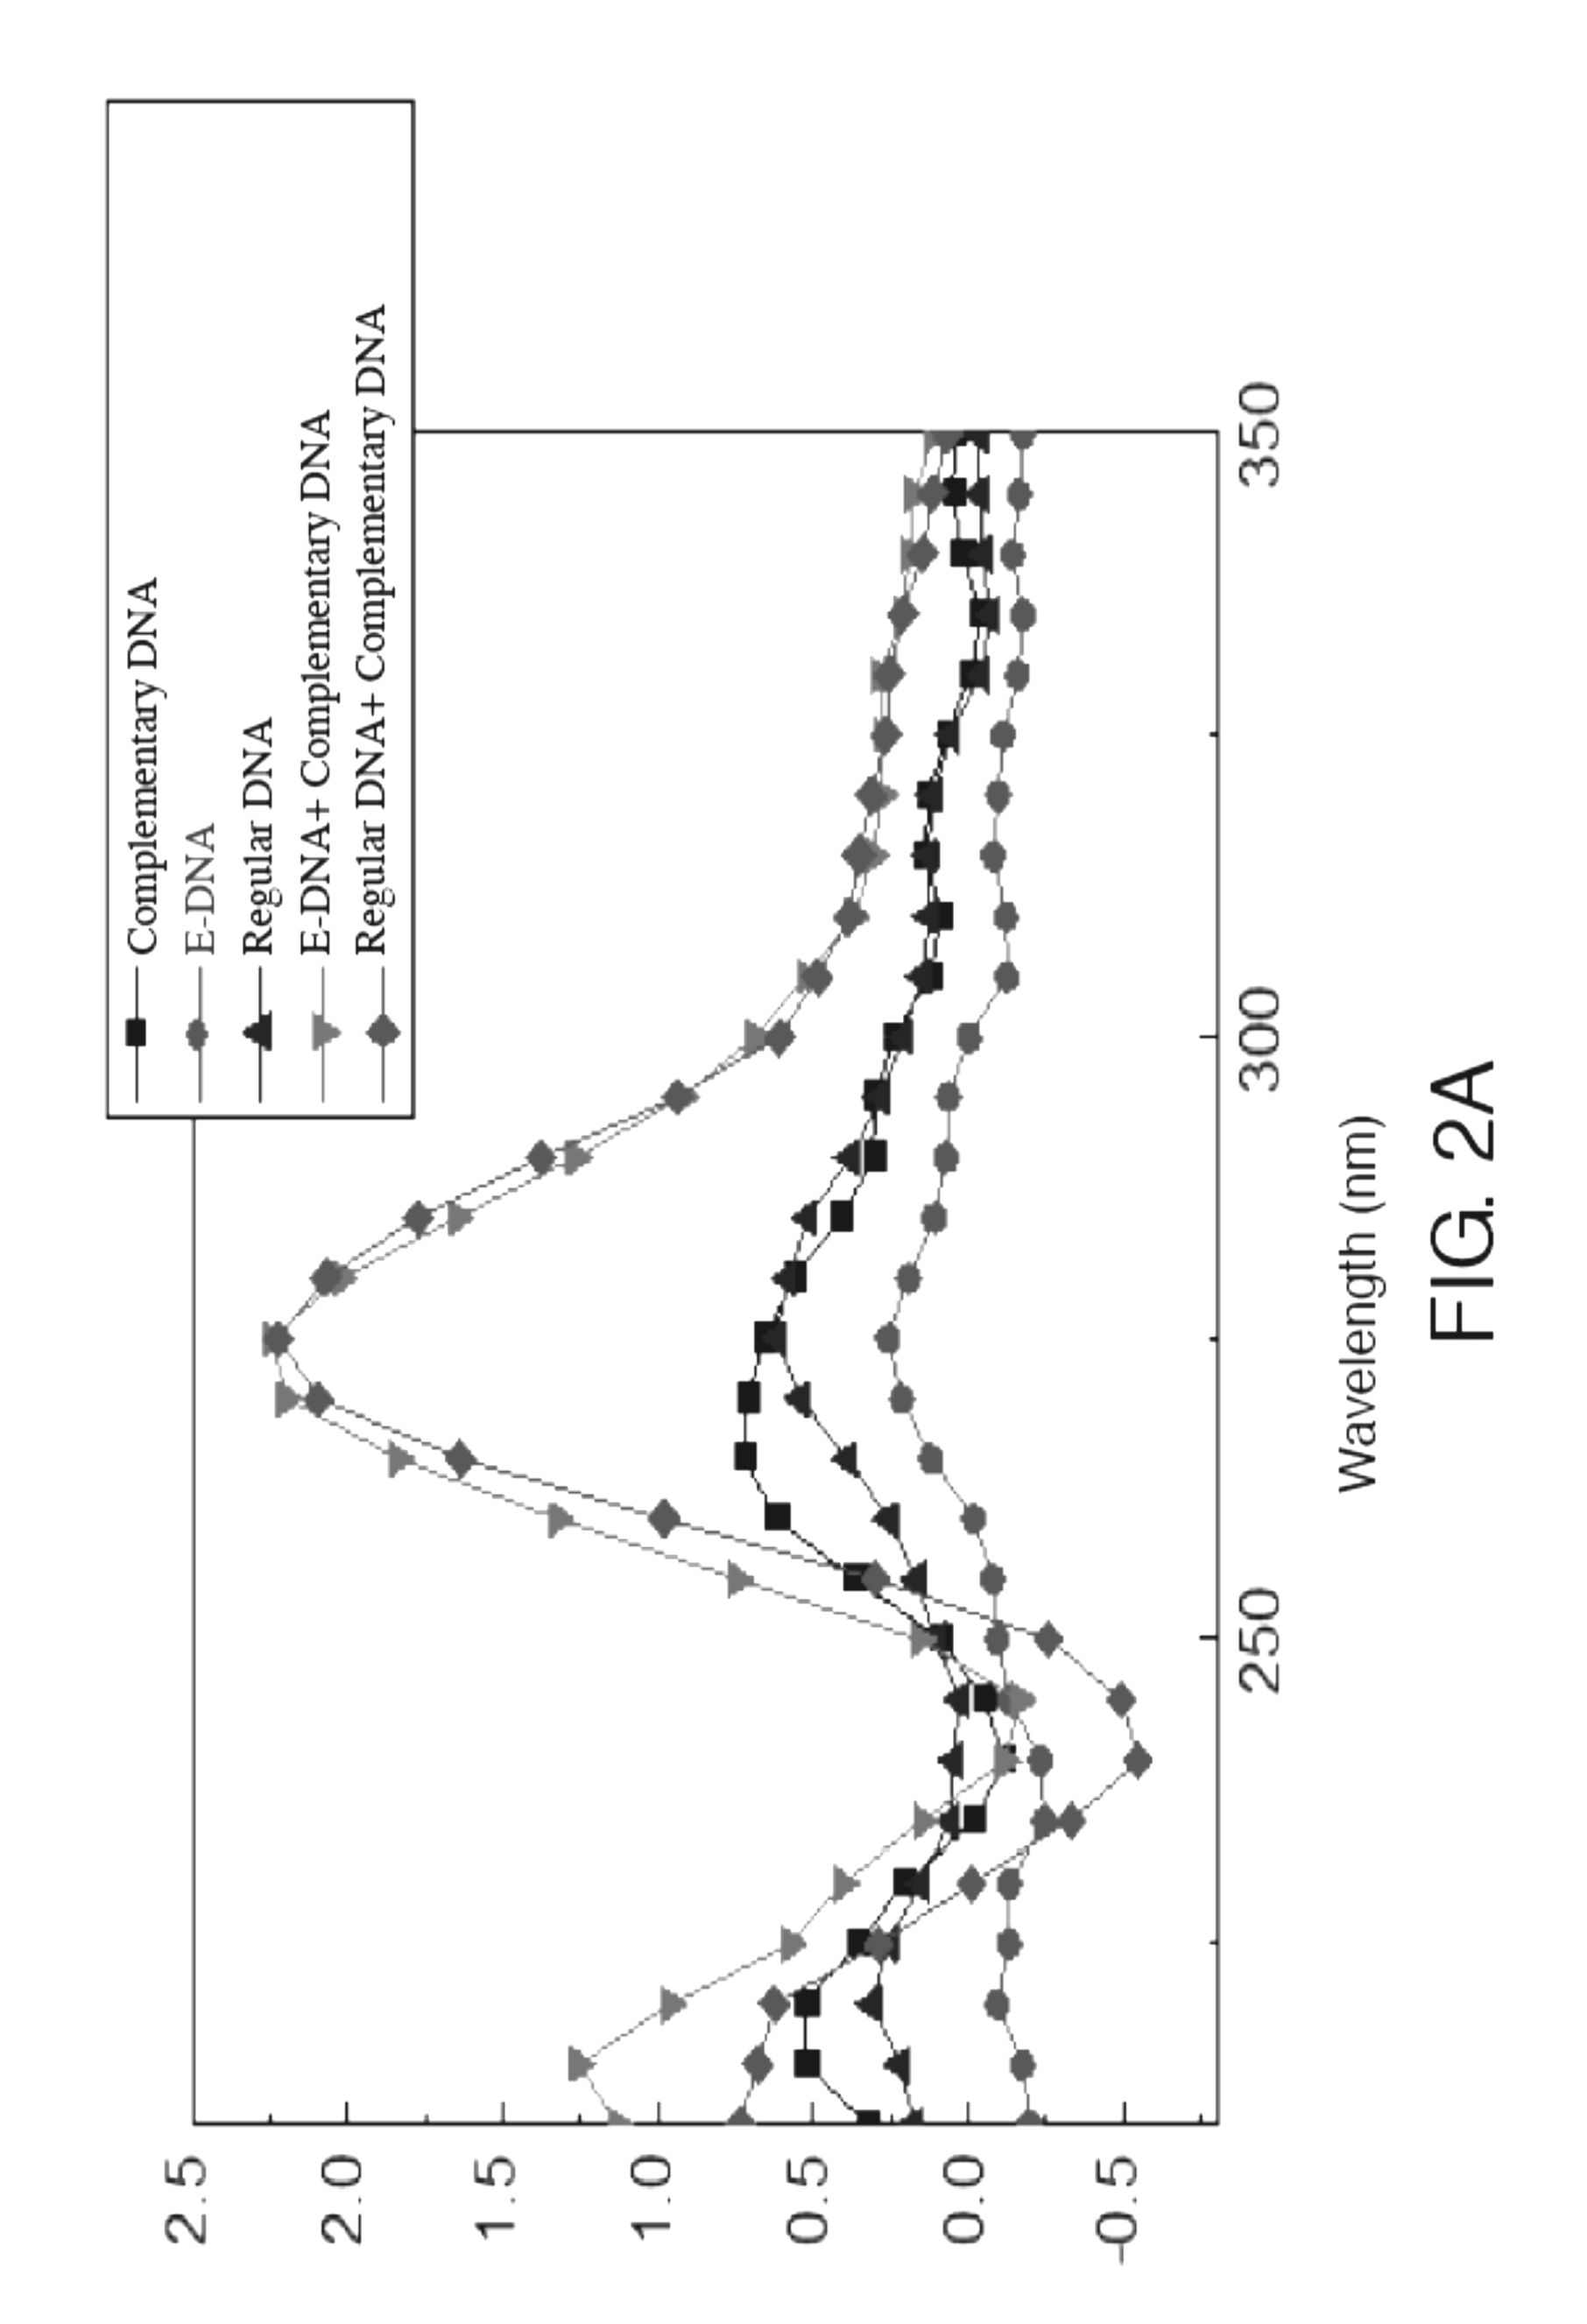 Method of using neutrilized DNA (N-DNA) as surface probe for high throughput detection platform